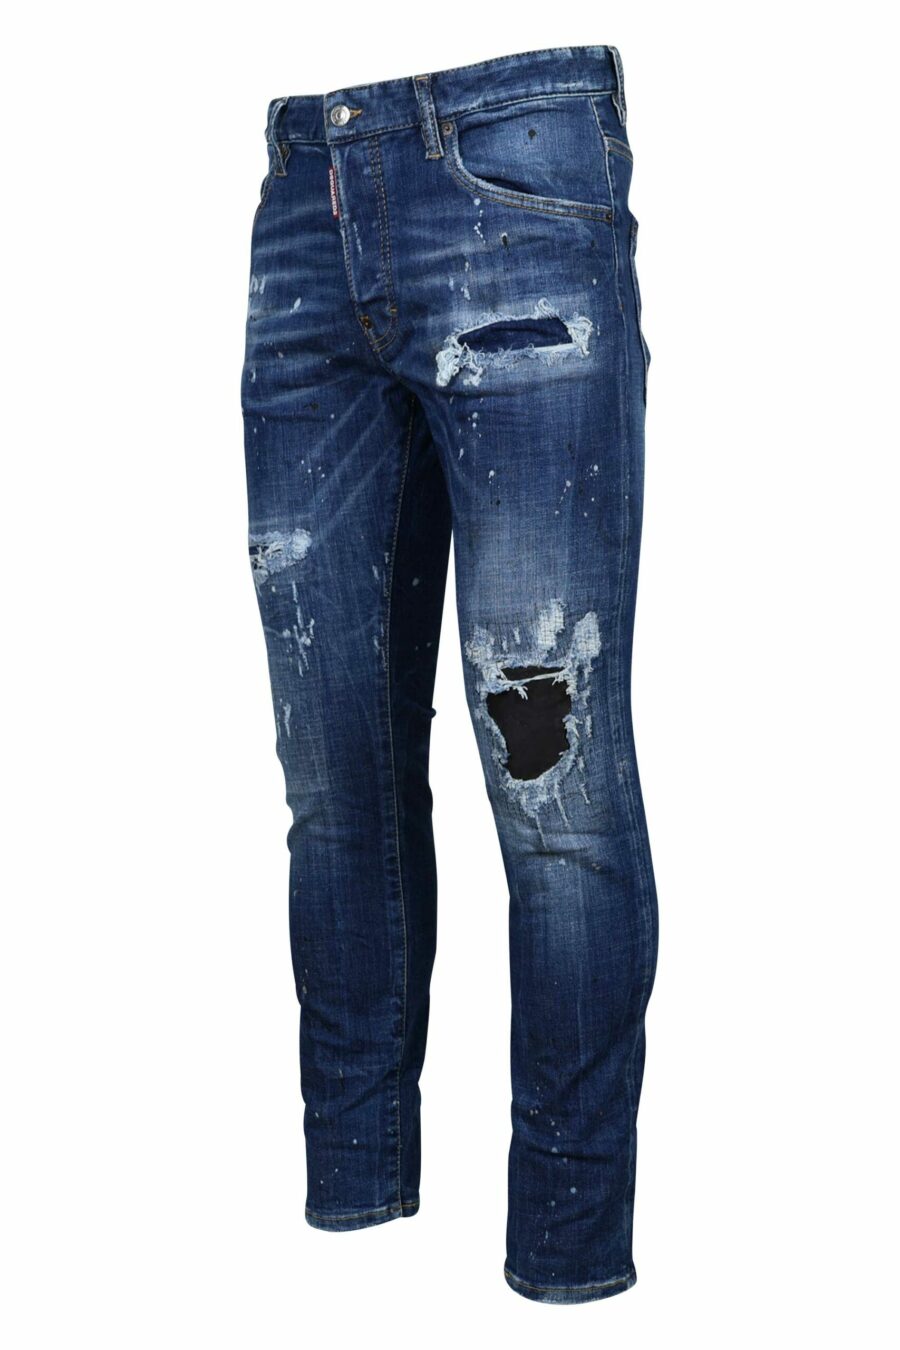 Blue "skater jean" jeans with rips and frayed - 8054148124687 1 1 scaled